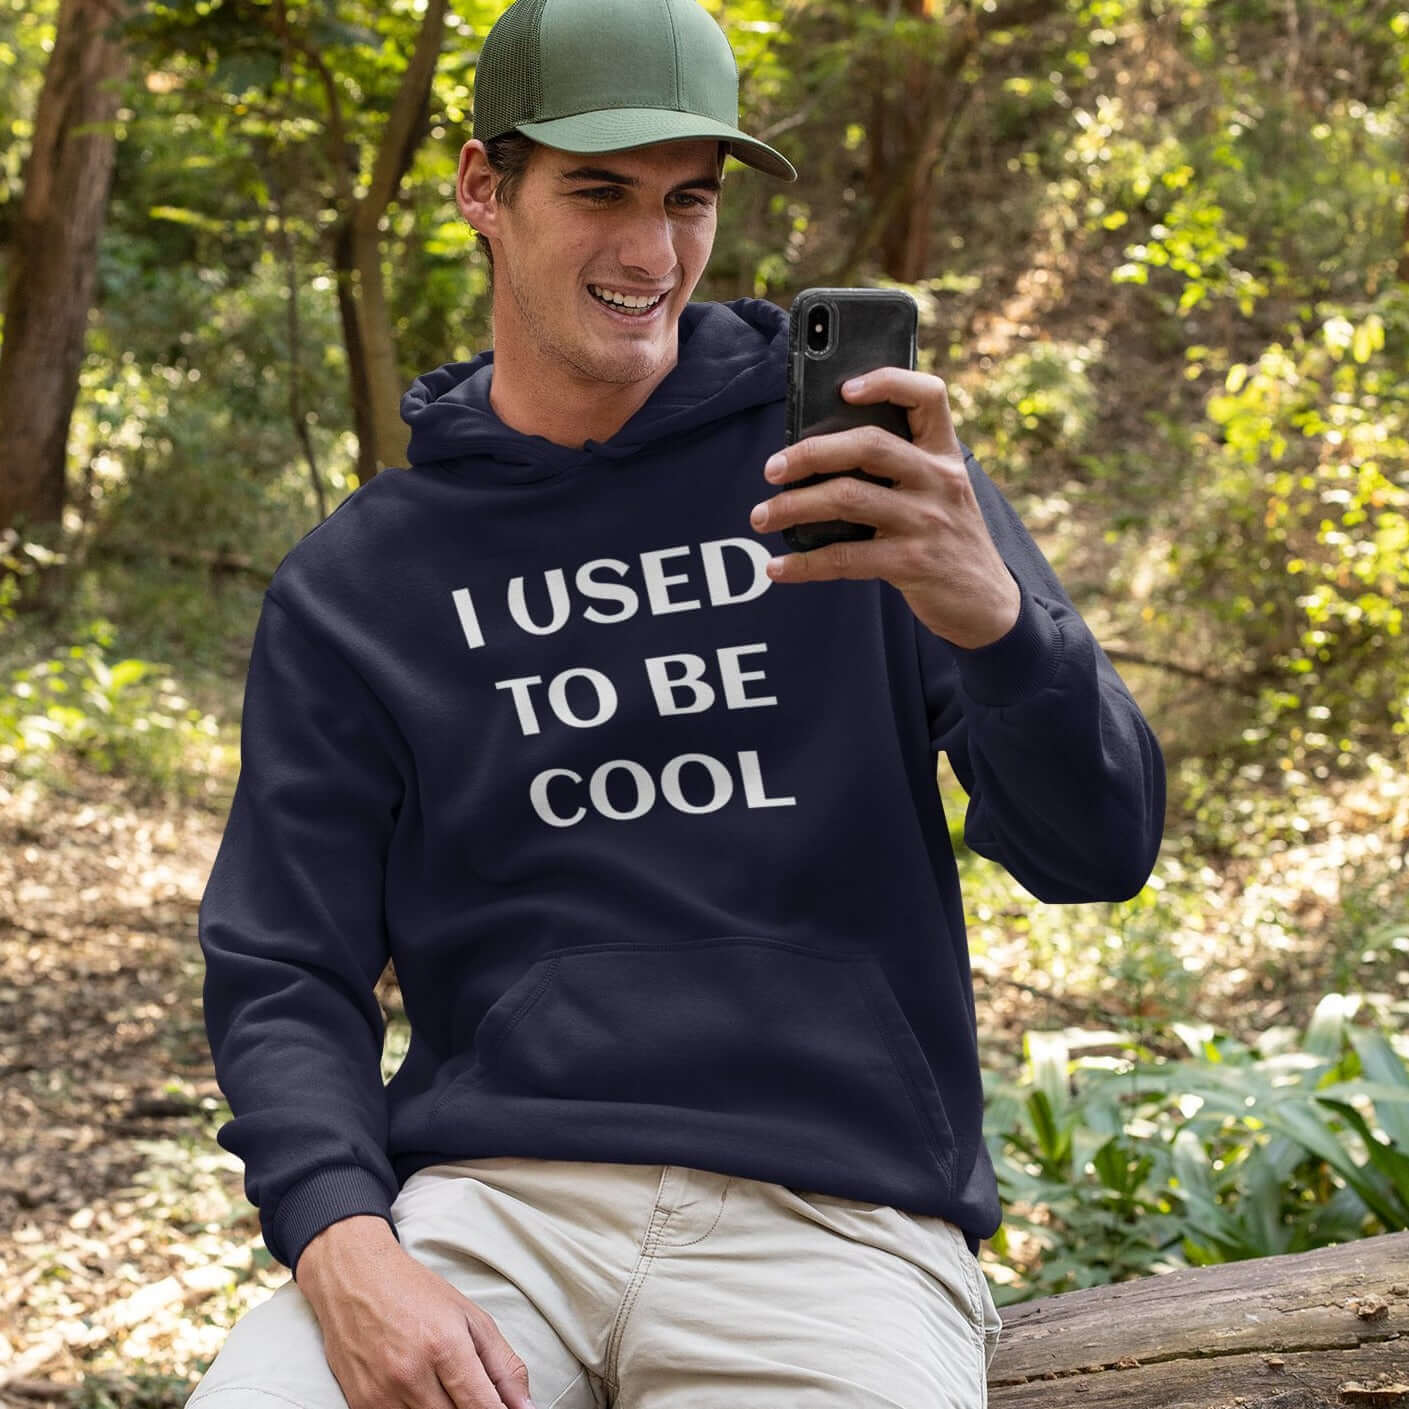 Laughing man wearing a navy blue hoodie sweatshirt with the phrase I used to be cool printed on the front.